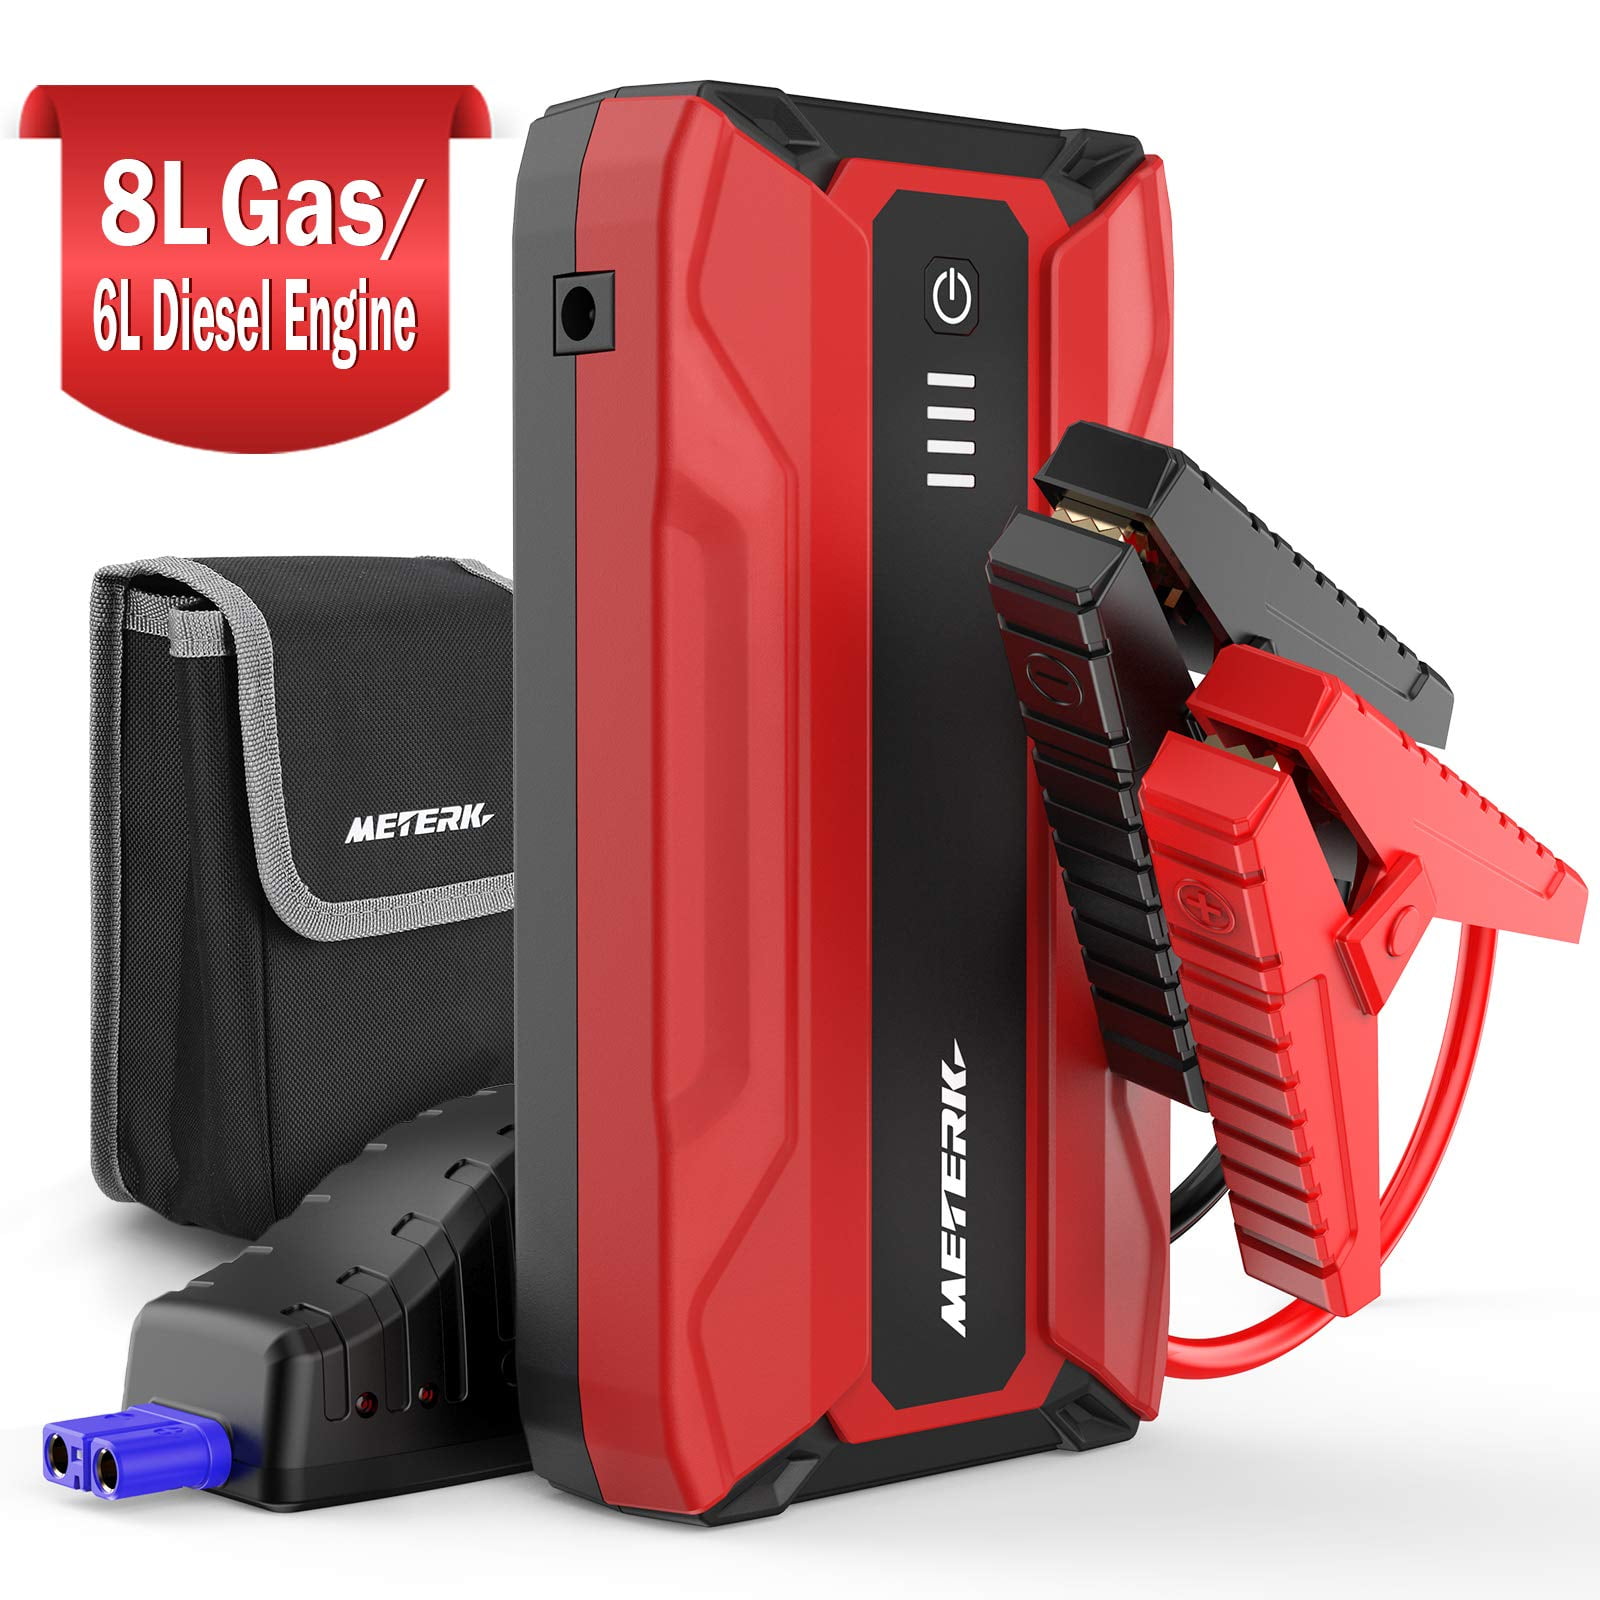 Meterk 1500A Peak 18000mAh Car Jump Starter up to 8.0L Gas, 6.0L Diesel Engine with LCD Screen,12-Volt Ultra Safe Portable Lithium Car Battery Jump Starter,USB Quick Charge with Built-in LED Light 